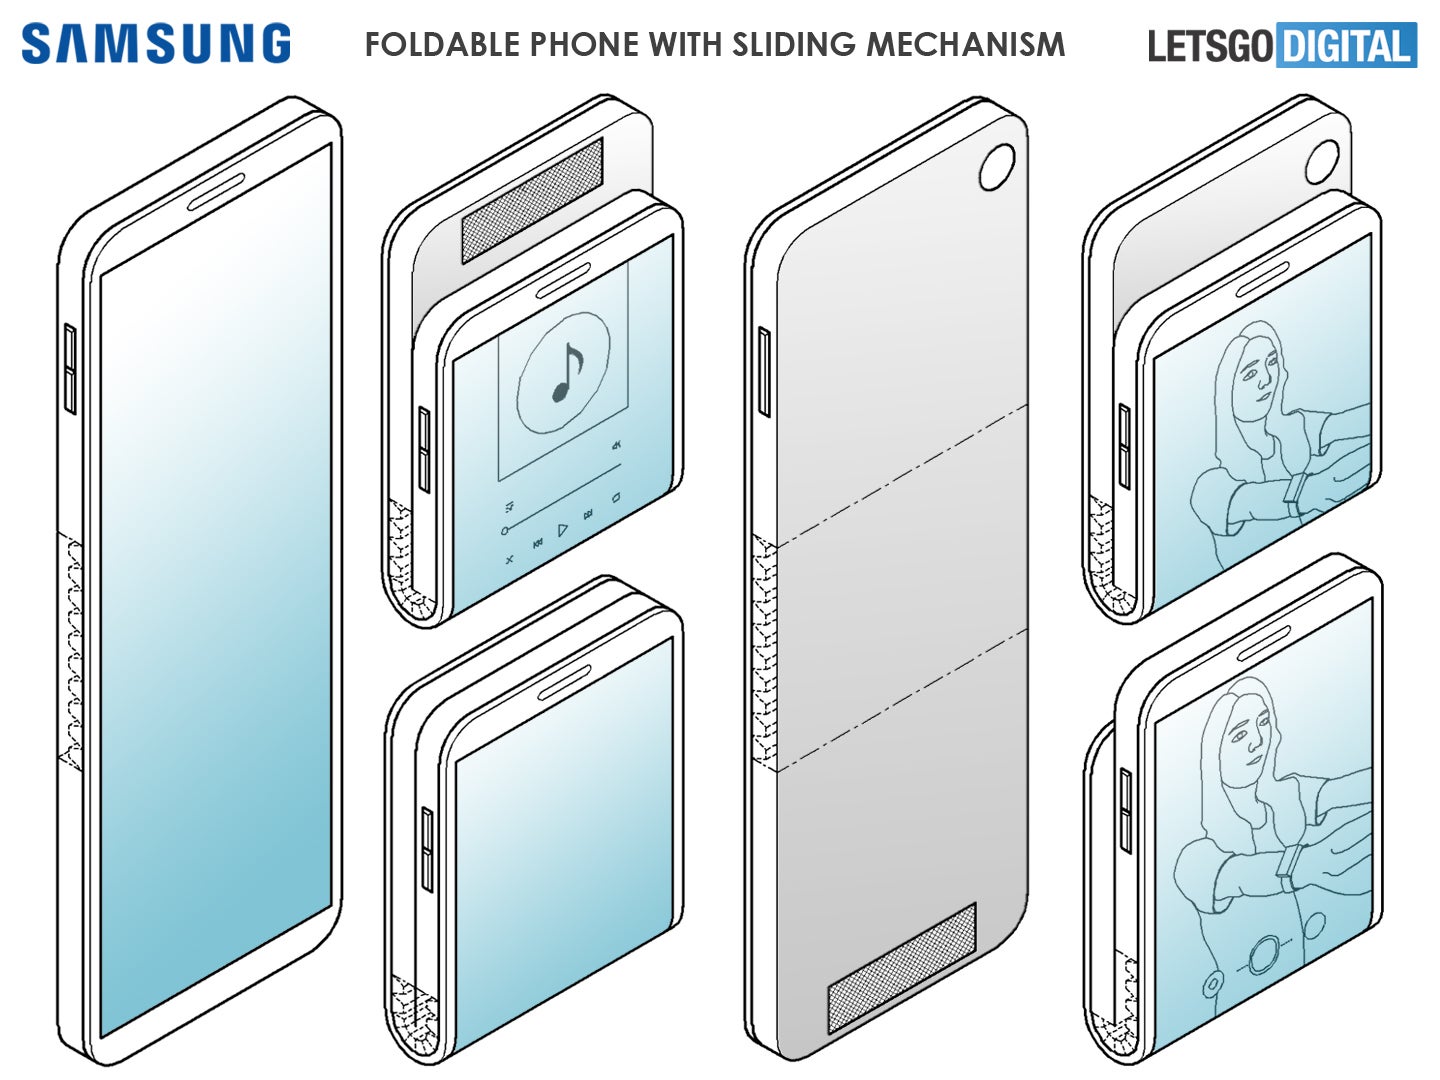 Samsung's clamshell answer to the foldable Moto RAZR 2019 leaked in patents